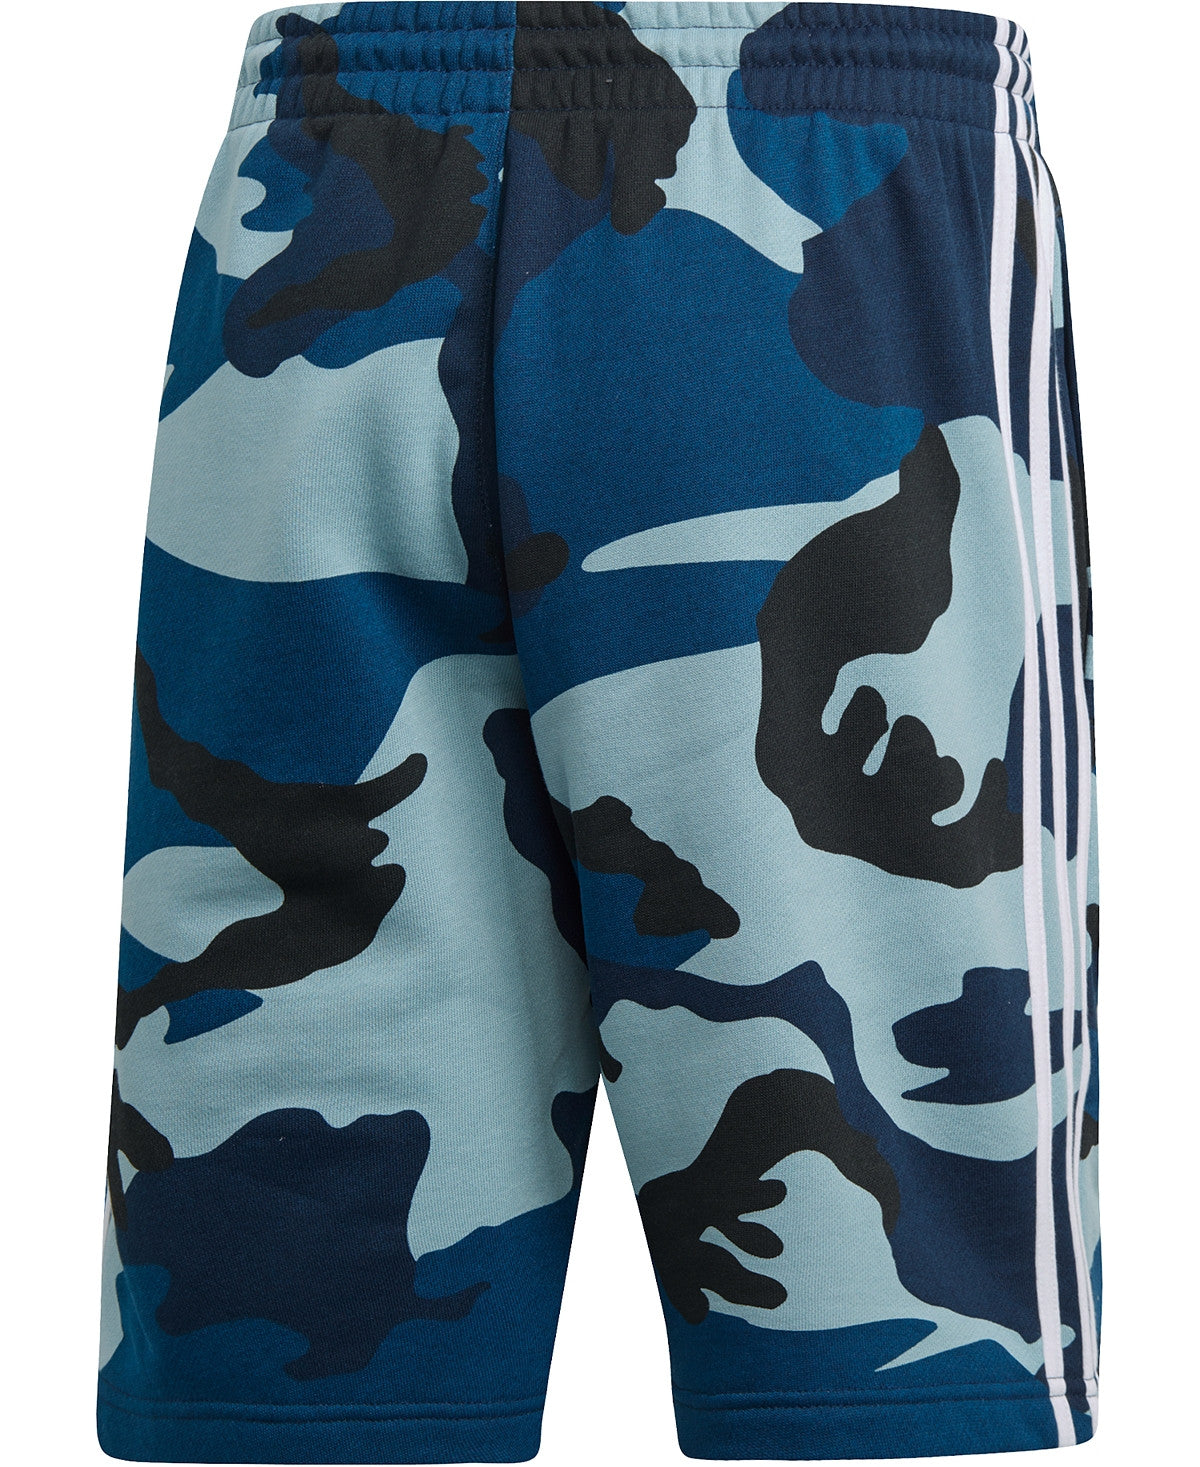 Adidas Originals Camouflageprint French Terry Sweat Shorts Camo